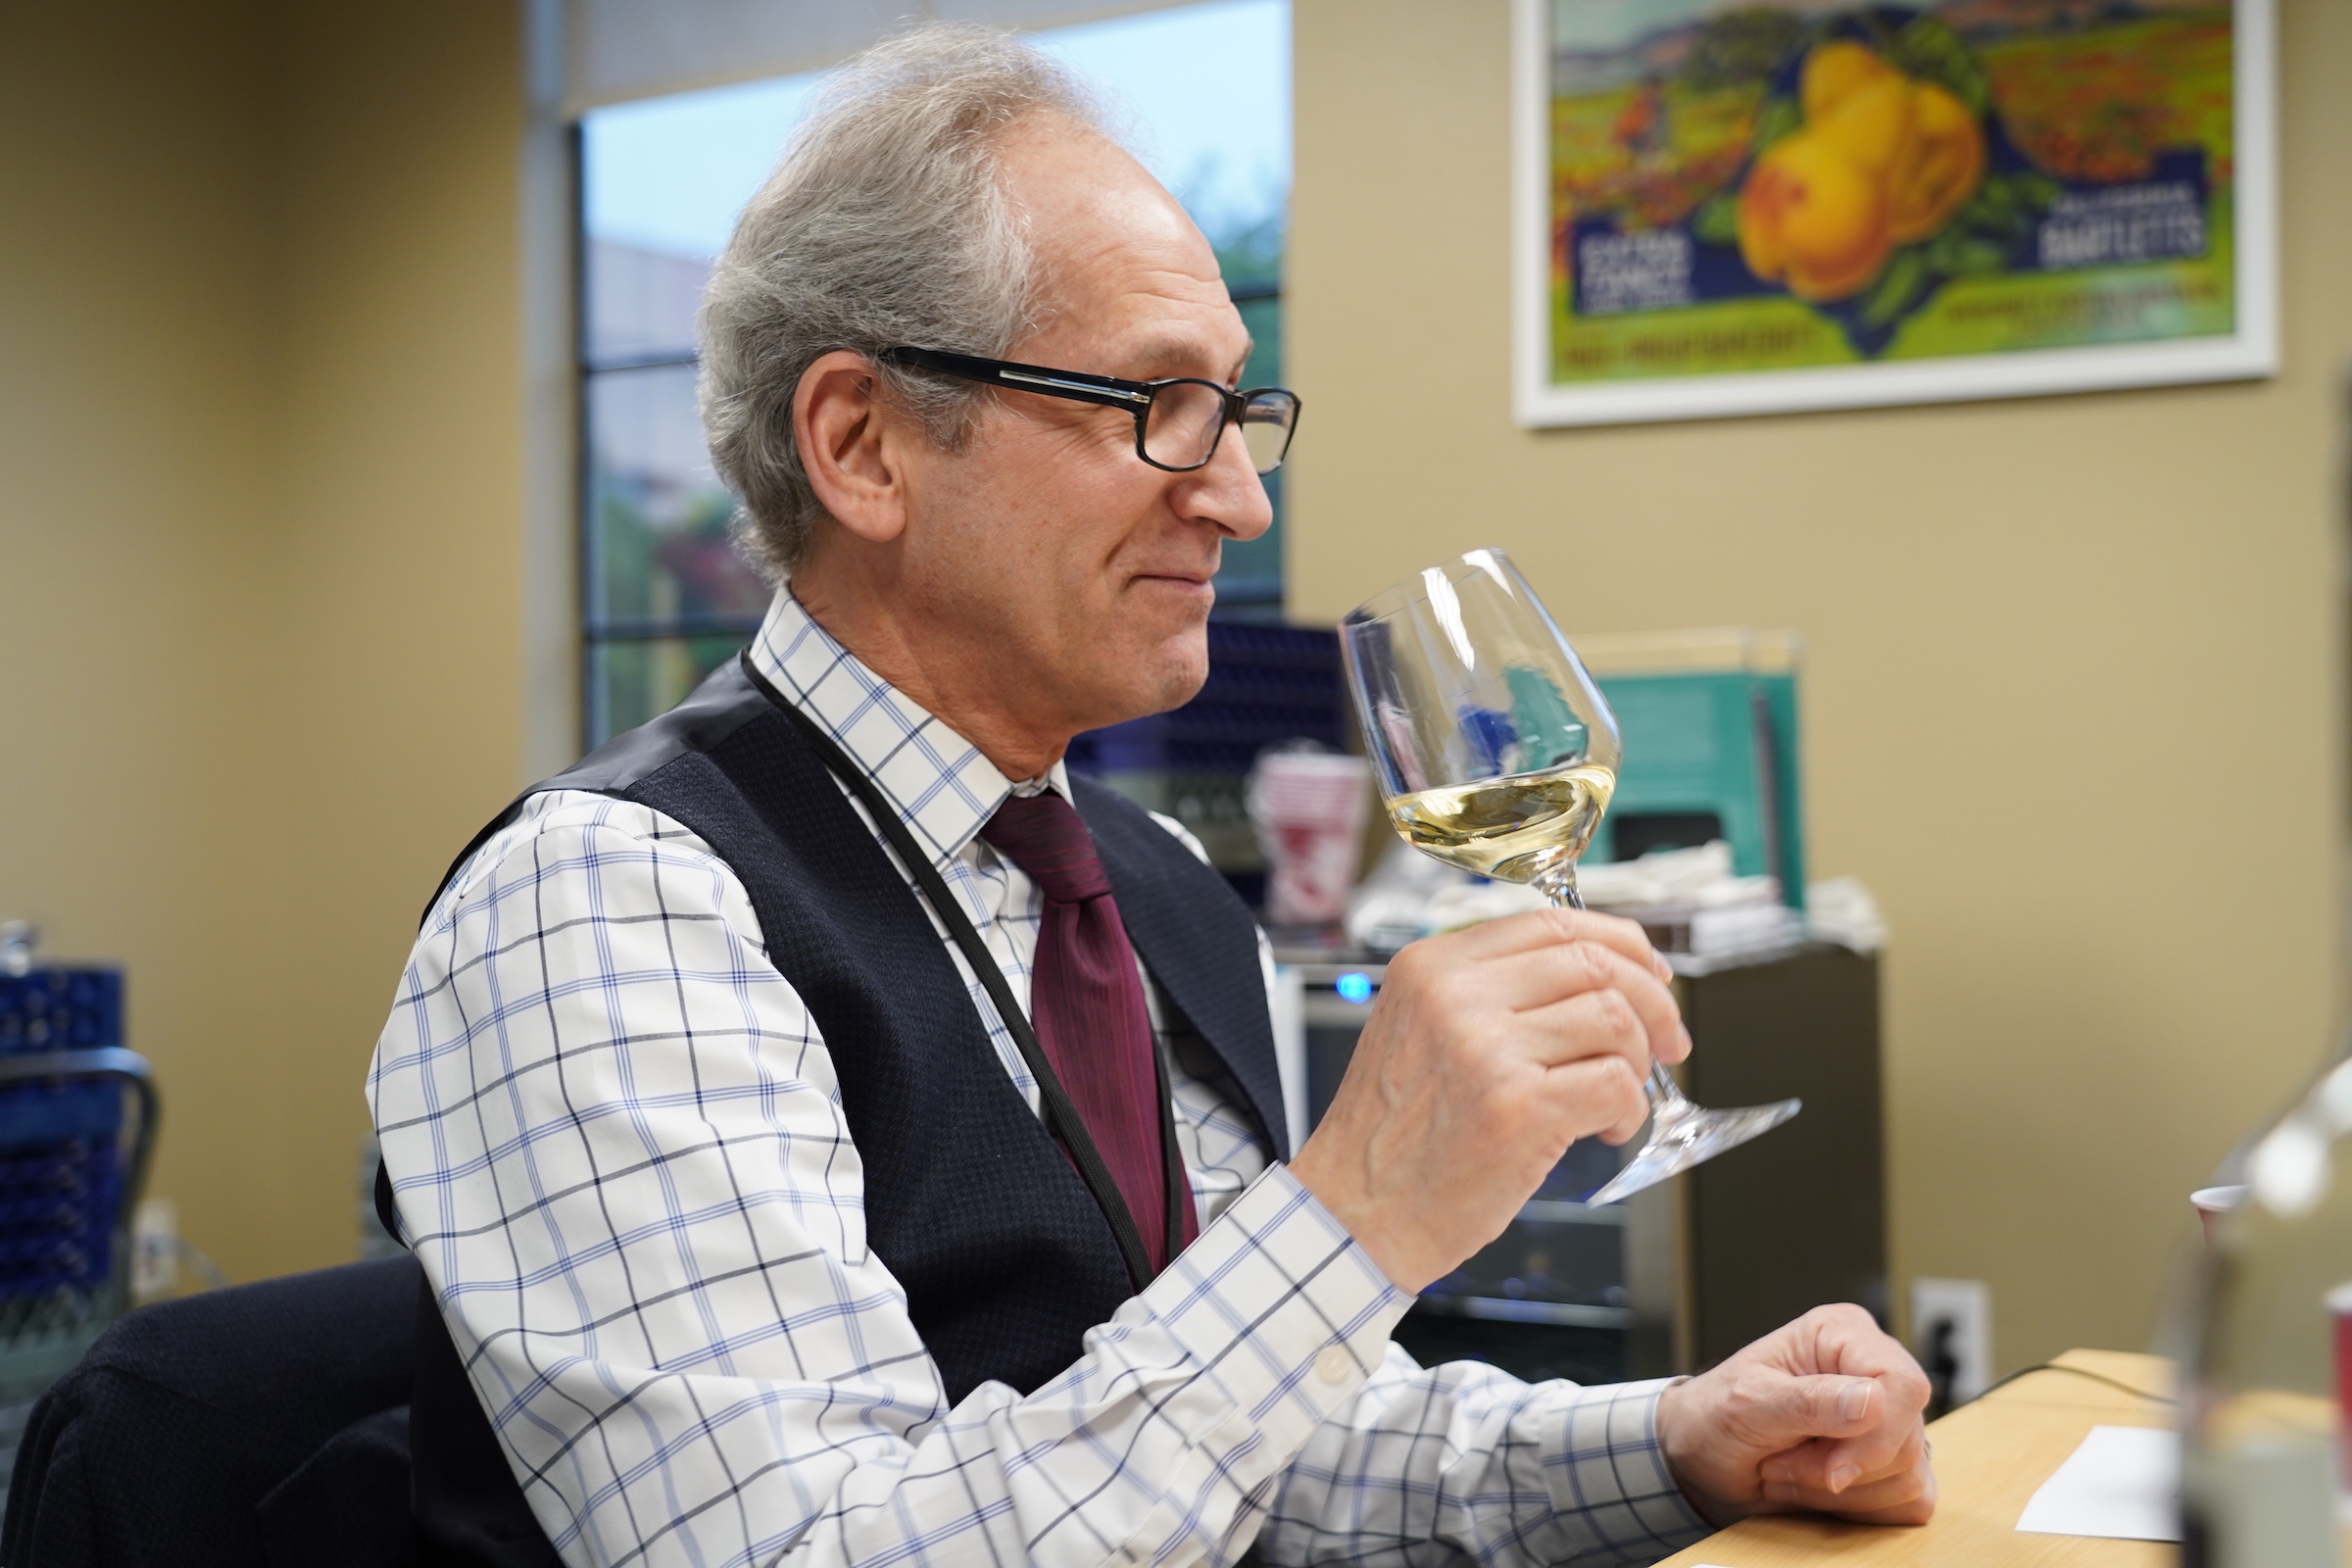 ICE LA's Lead Instructor of Wine Studies Paul Sherman smells of glass of white wine for the ICE course on how to become a sommelier